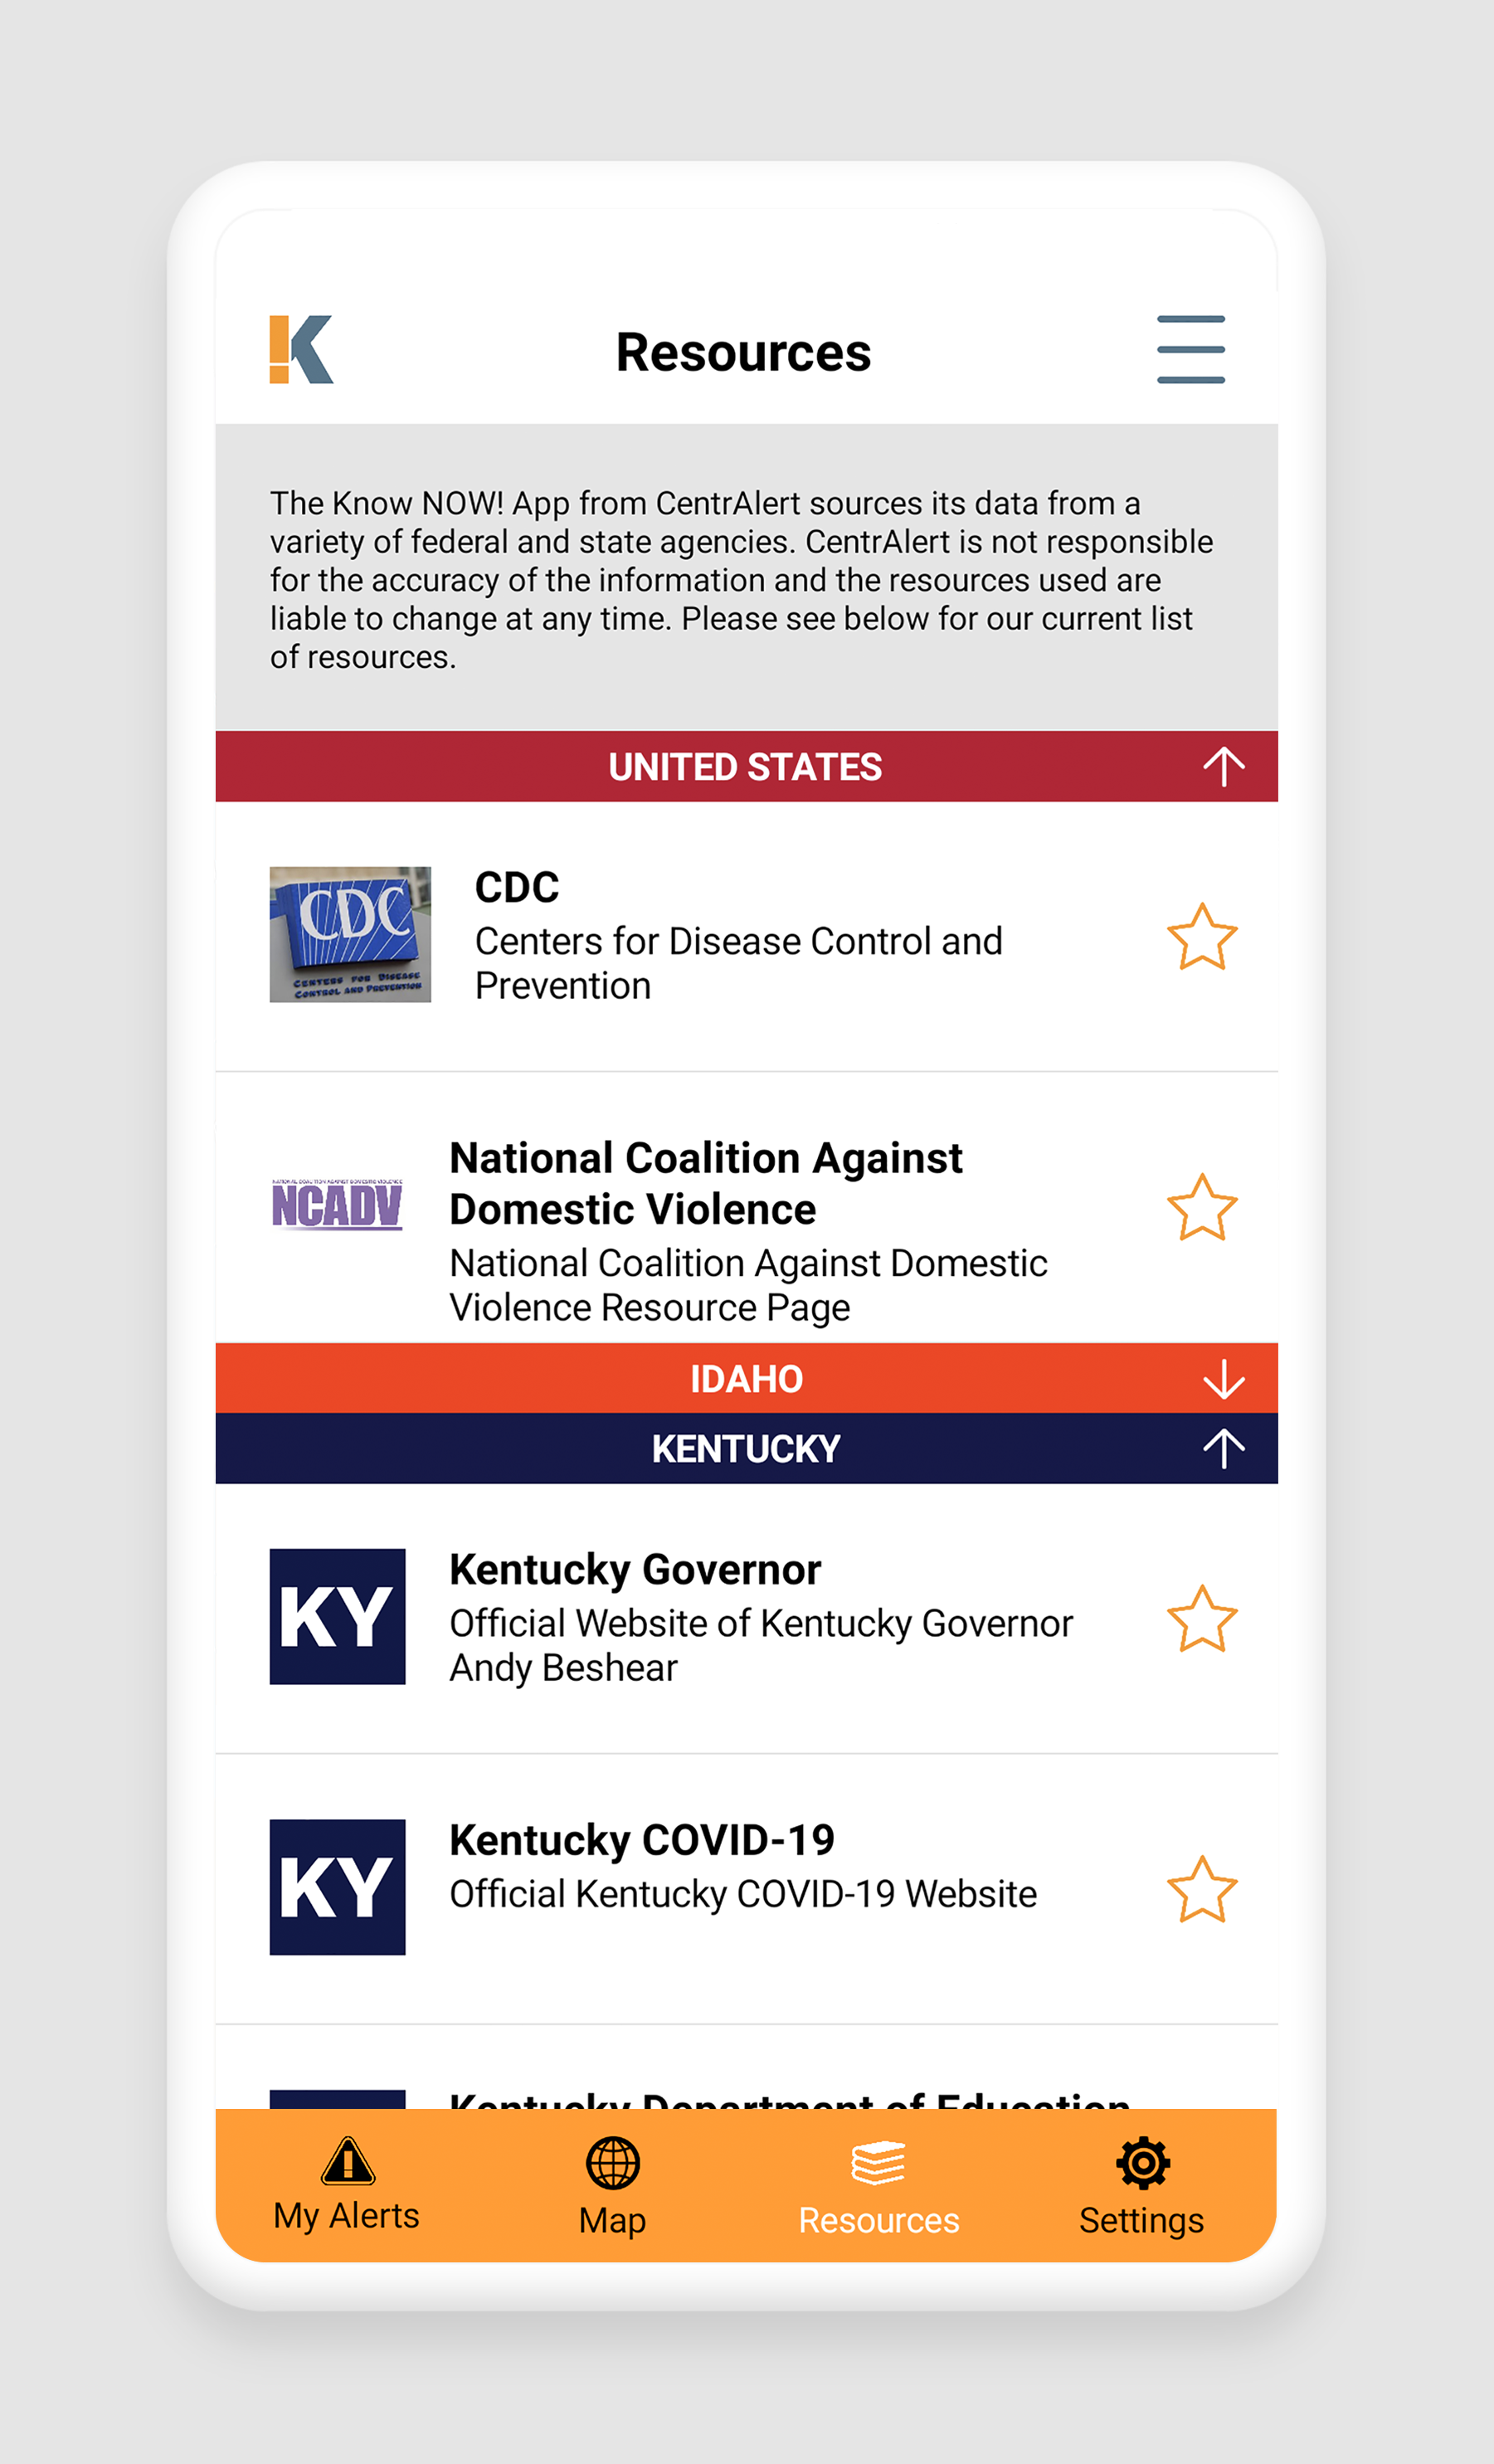 Know NOW! App for COVID-19